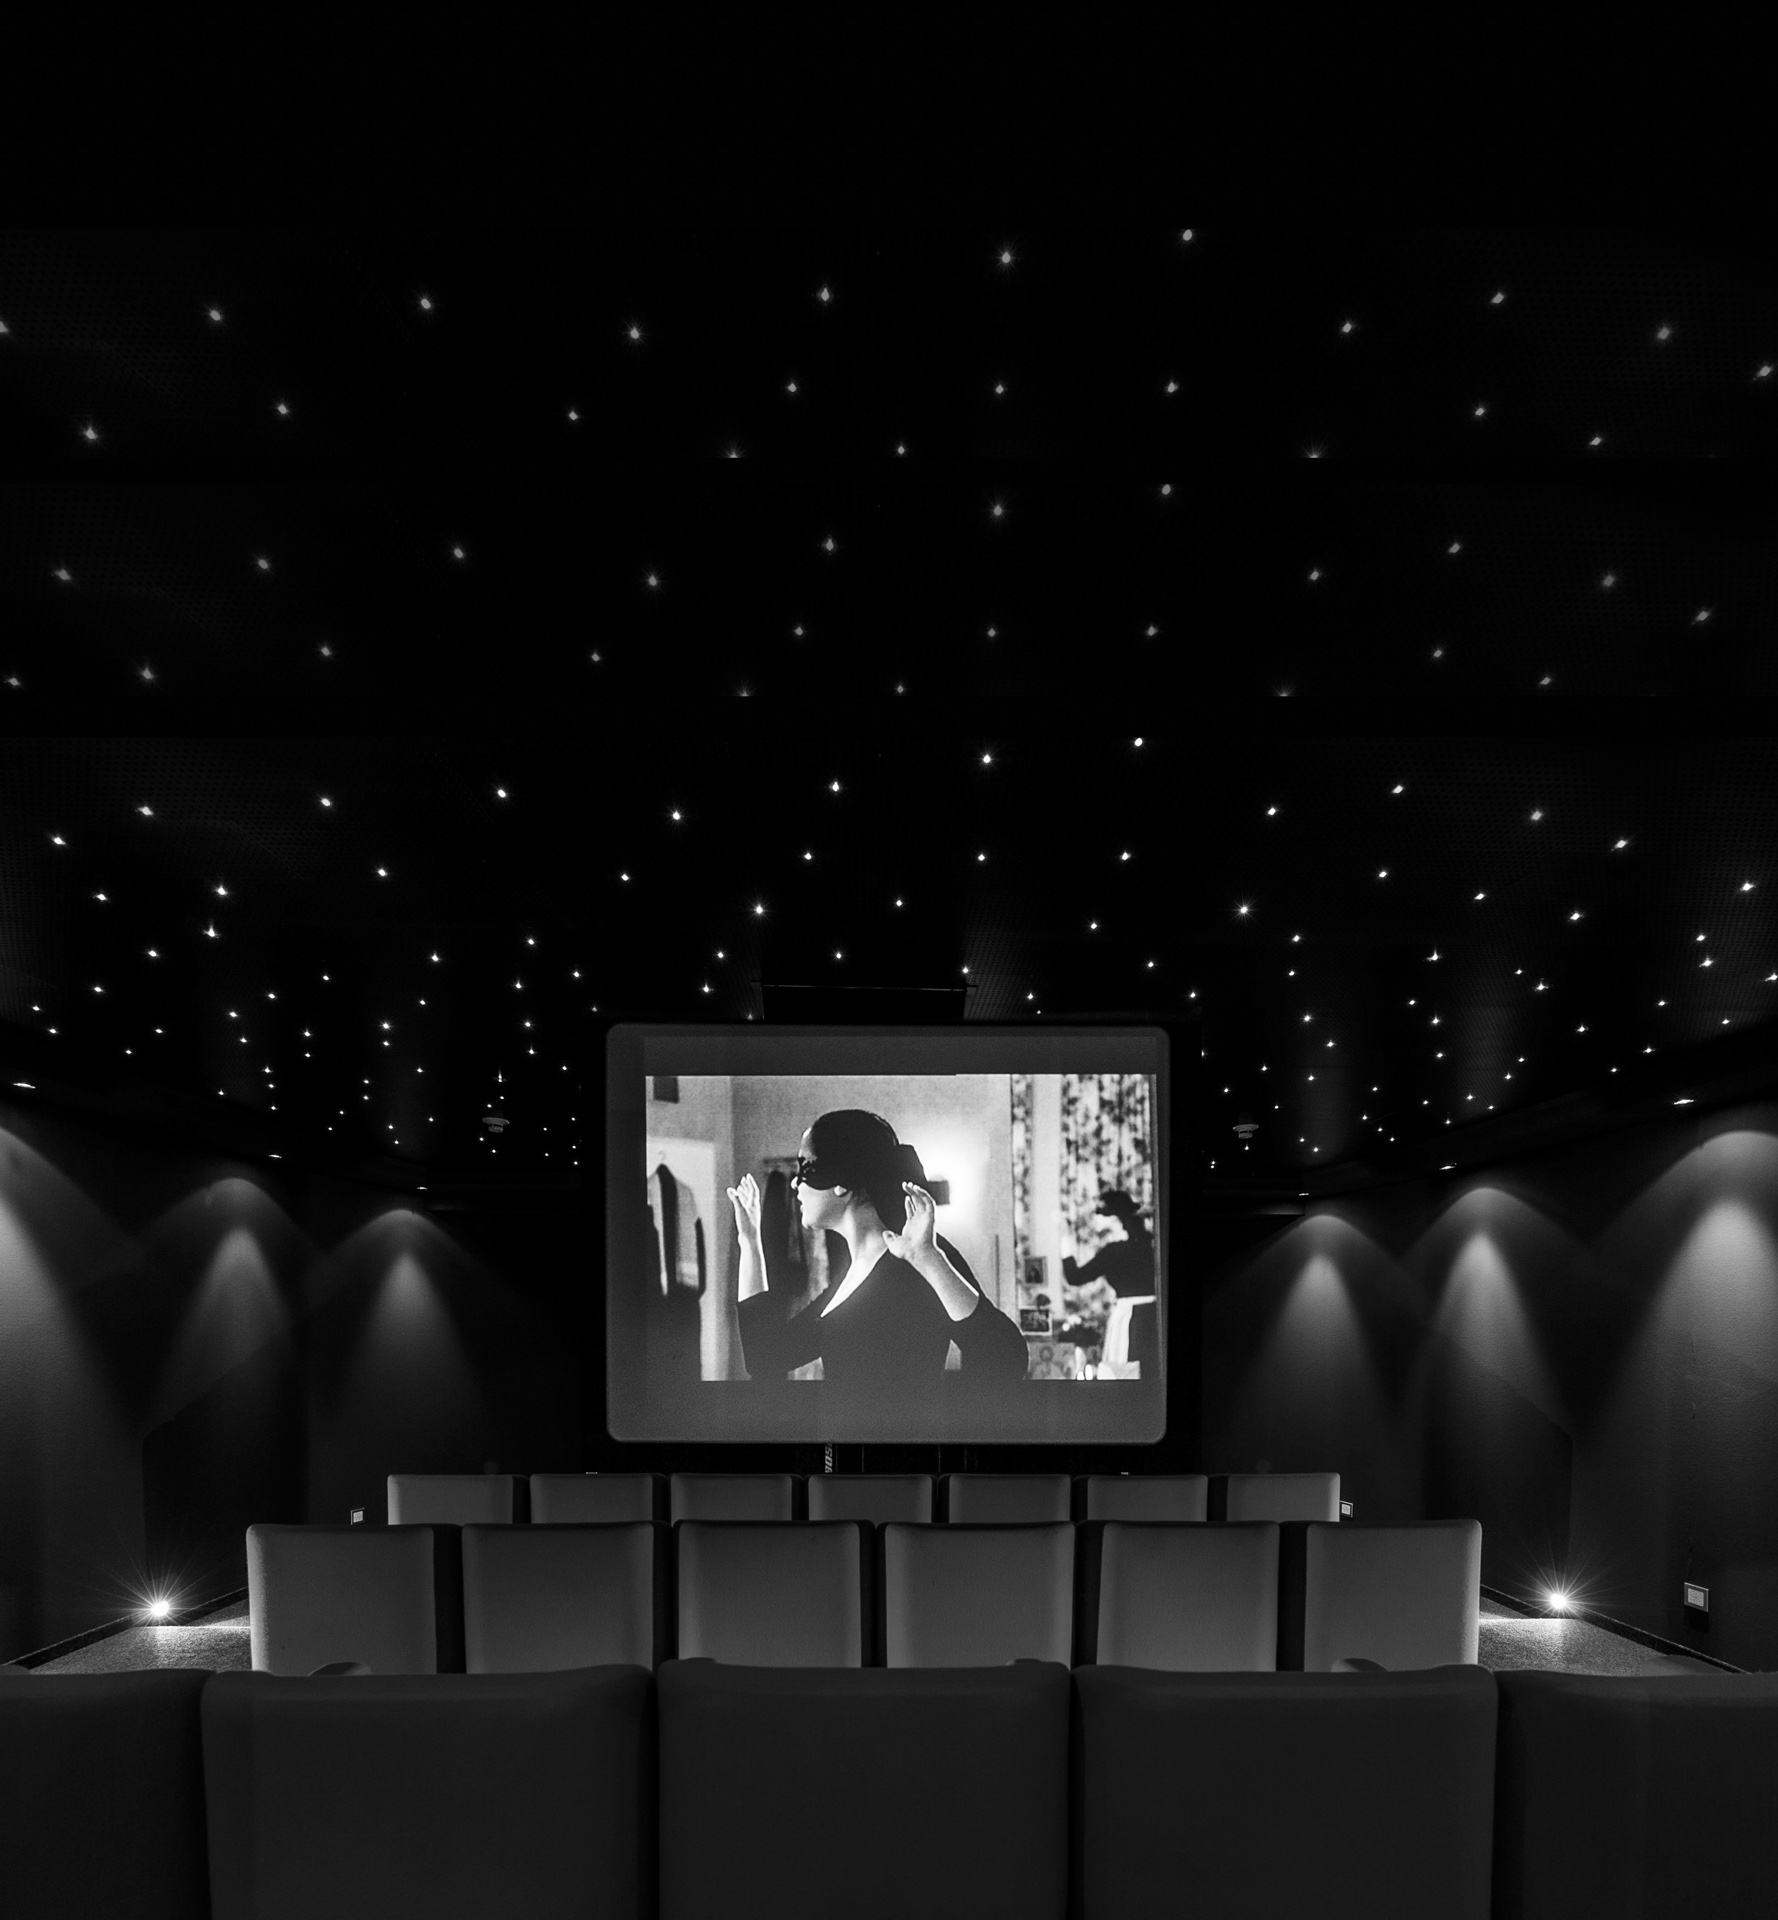 Swiss Deluxe Hotels Stories Summer 2021 Le Grand Bellevue Gstaad 05 Private Cinema Sw Ecirgb